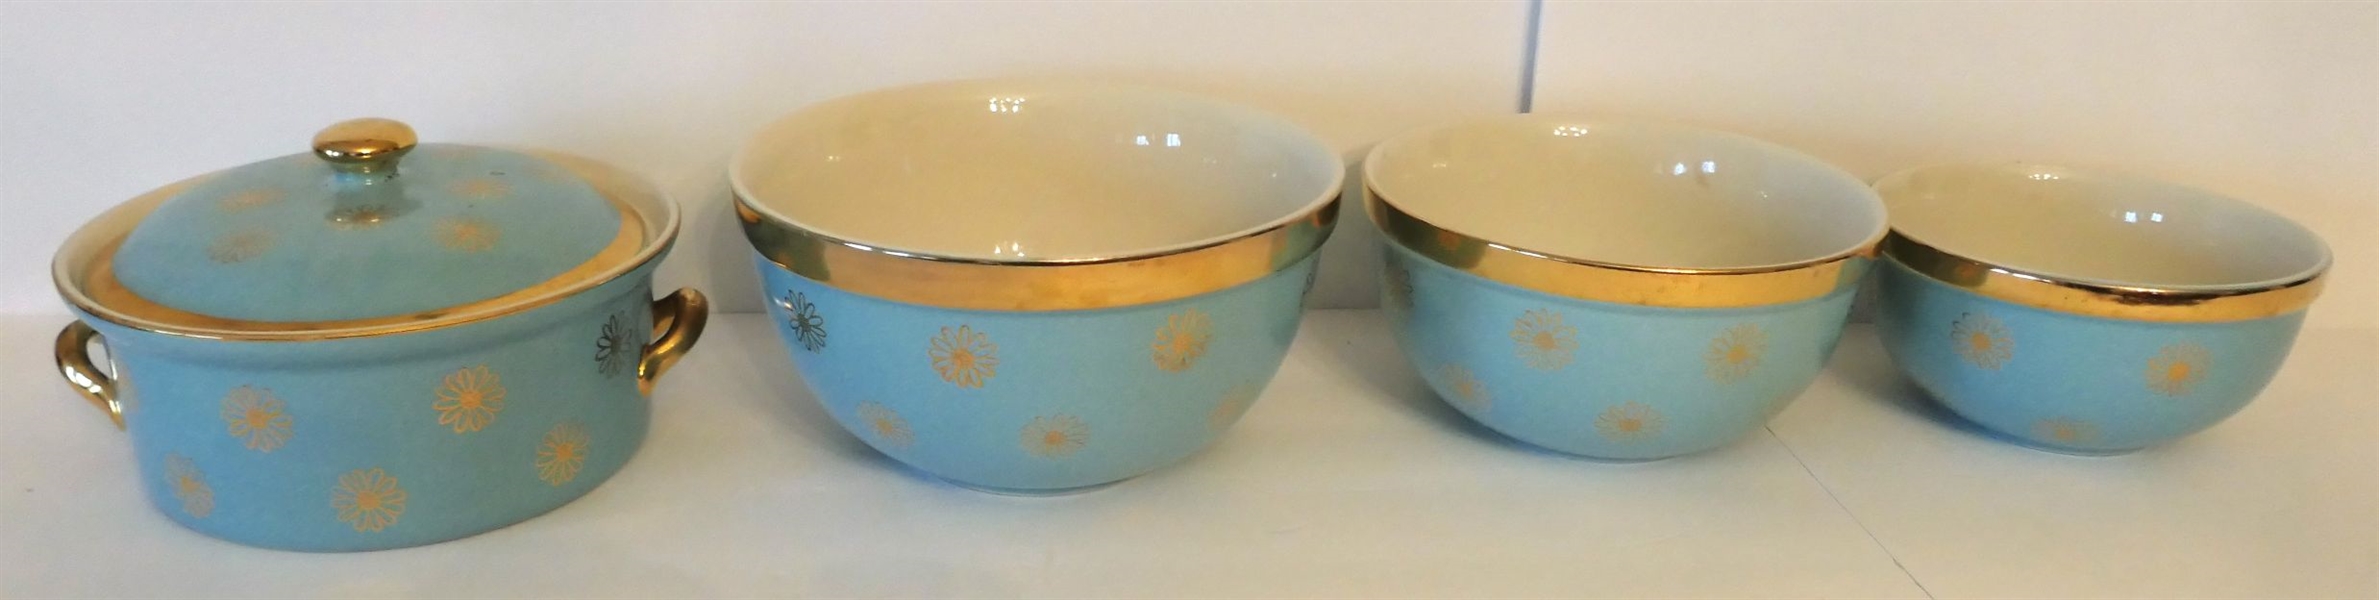 Nesting Halls Mixing Bowl Set  and Casserole Dish - Blue with Gold Flowers - Largest Bowl Measures 8 1/2" Across - All Appear Unused